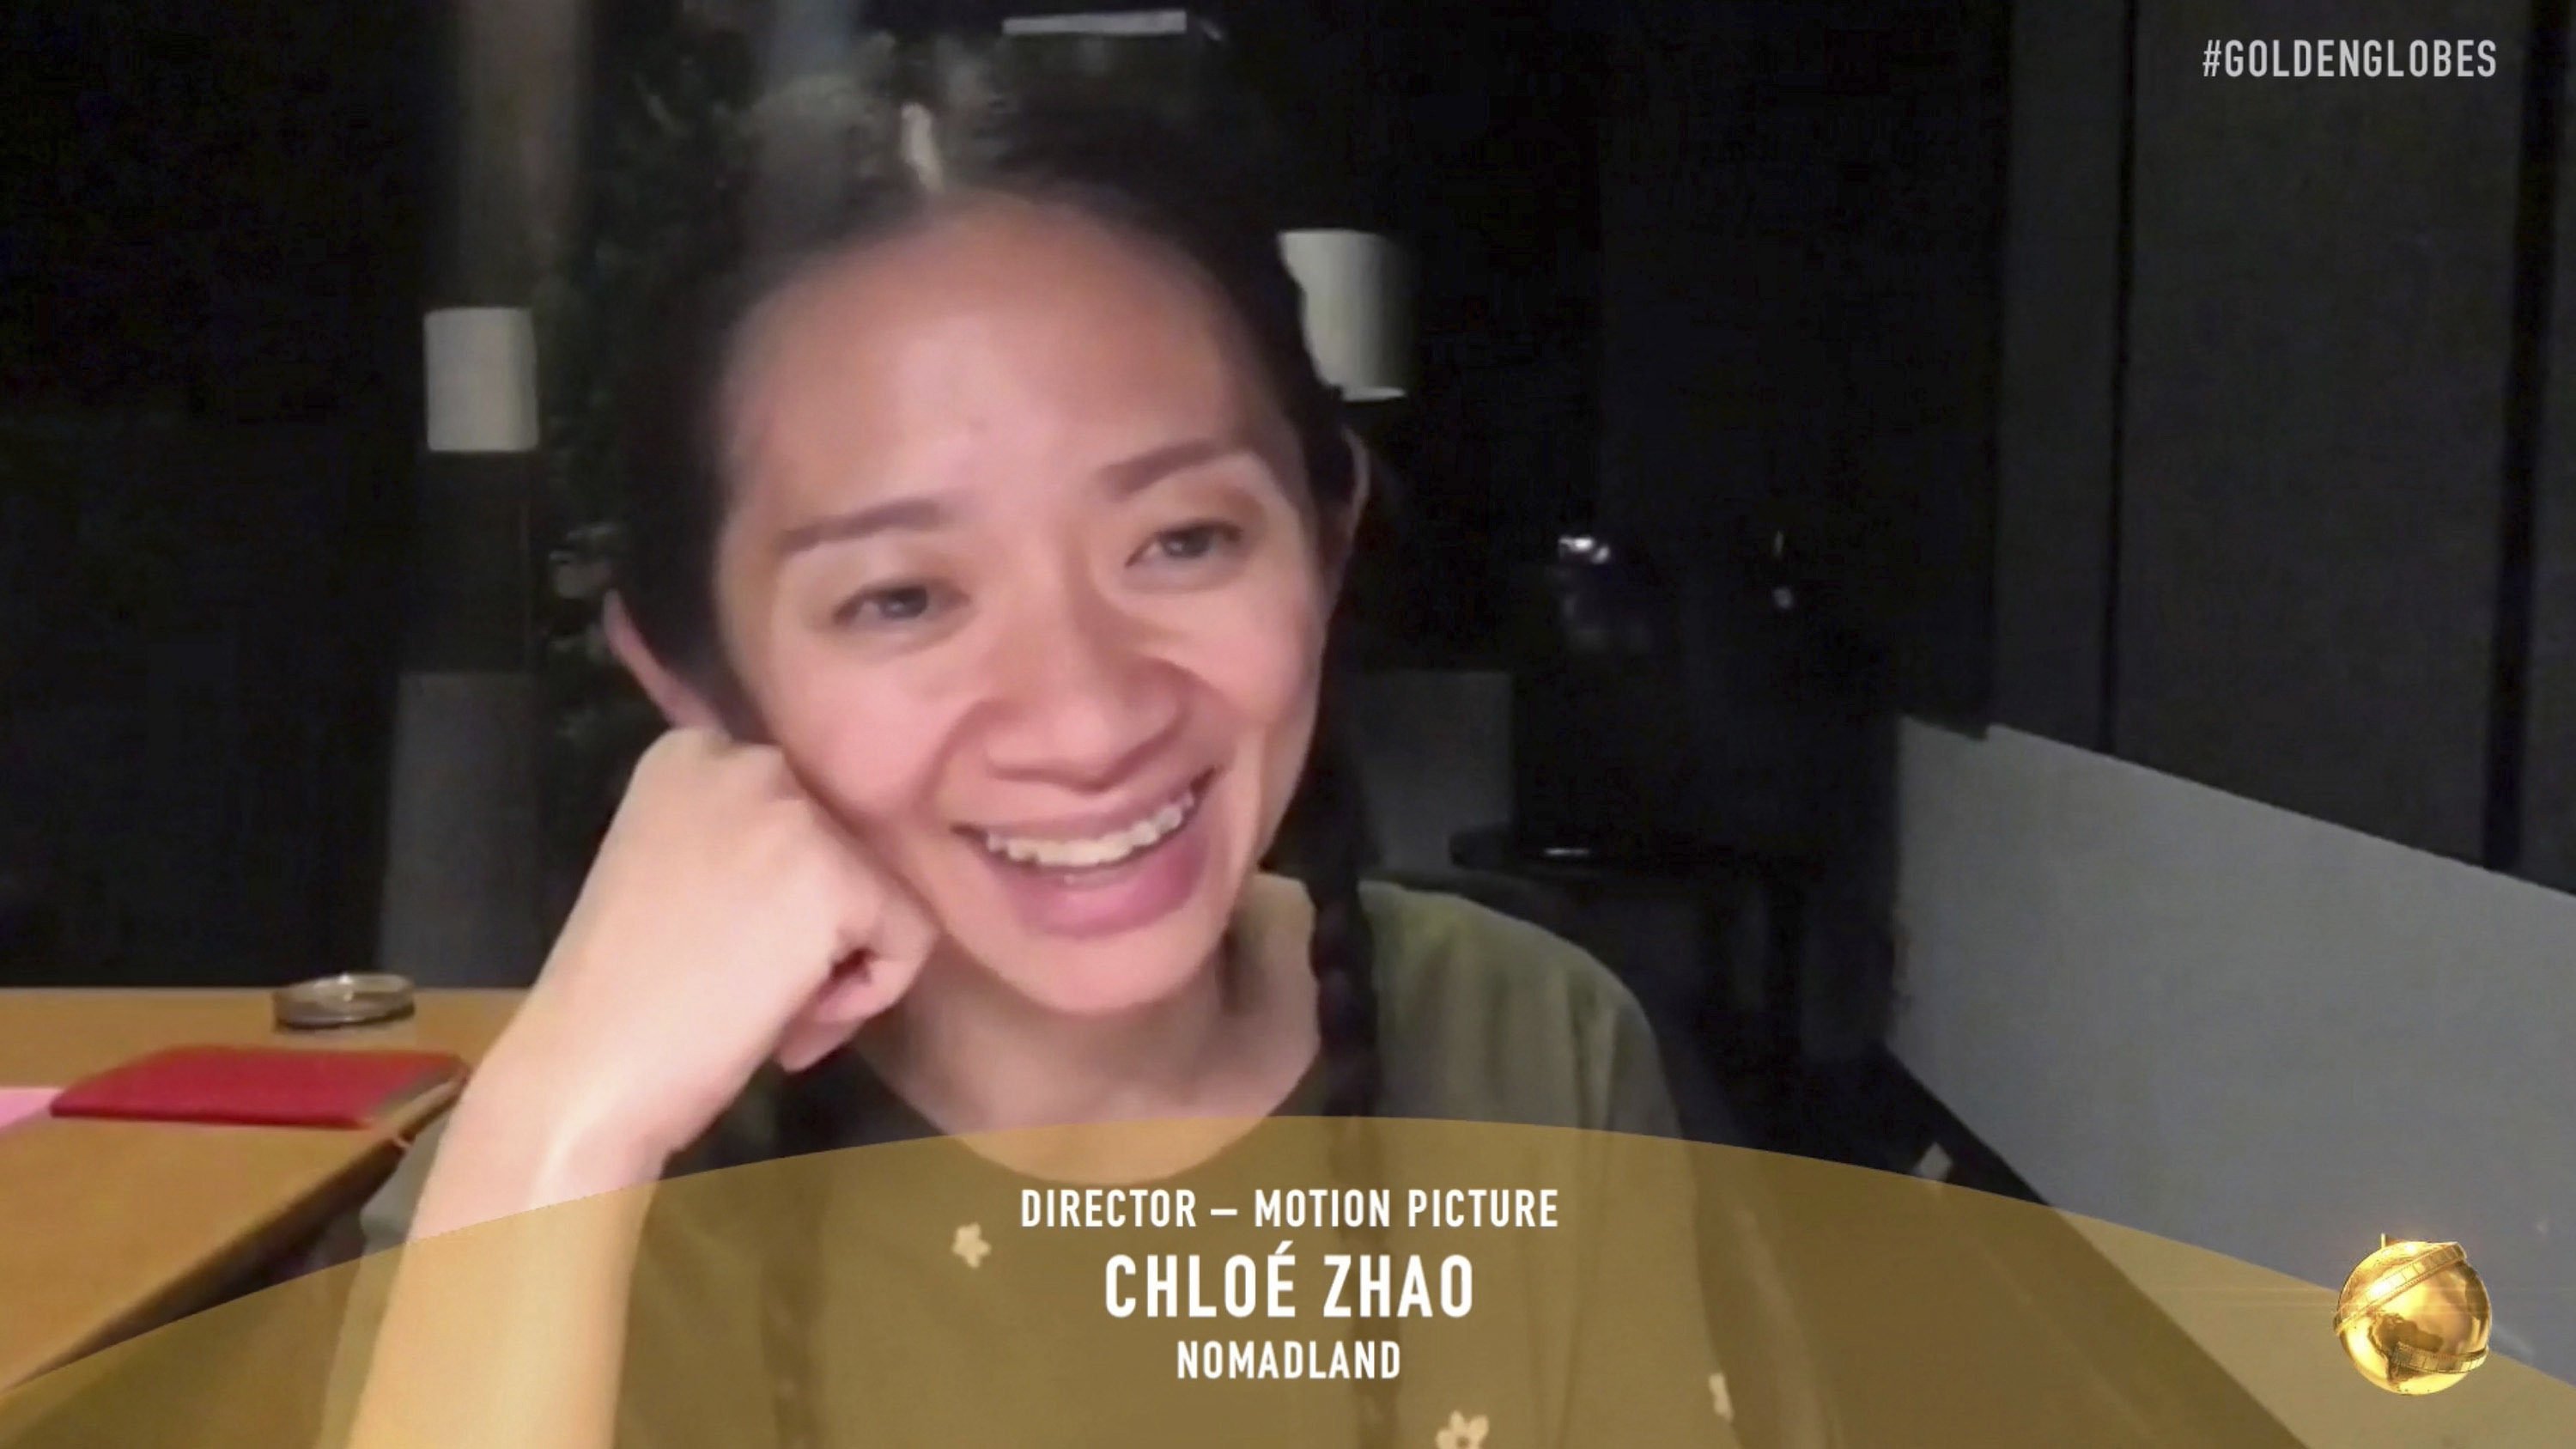 Chloé Zhao accepts the award for best director for a motion picture for Nomadland at the Golden Globe Awards. NBC via AP